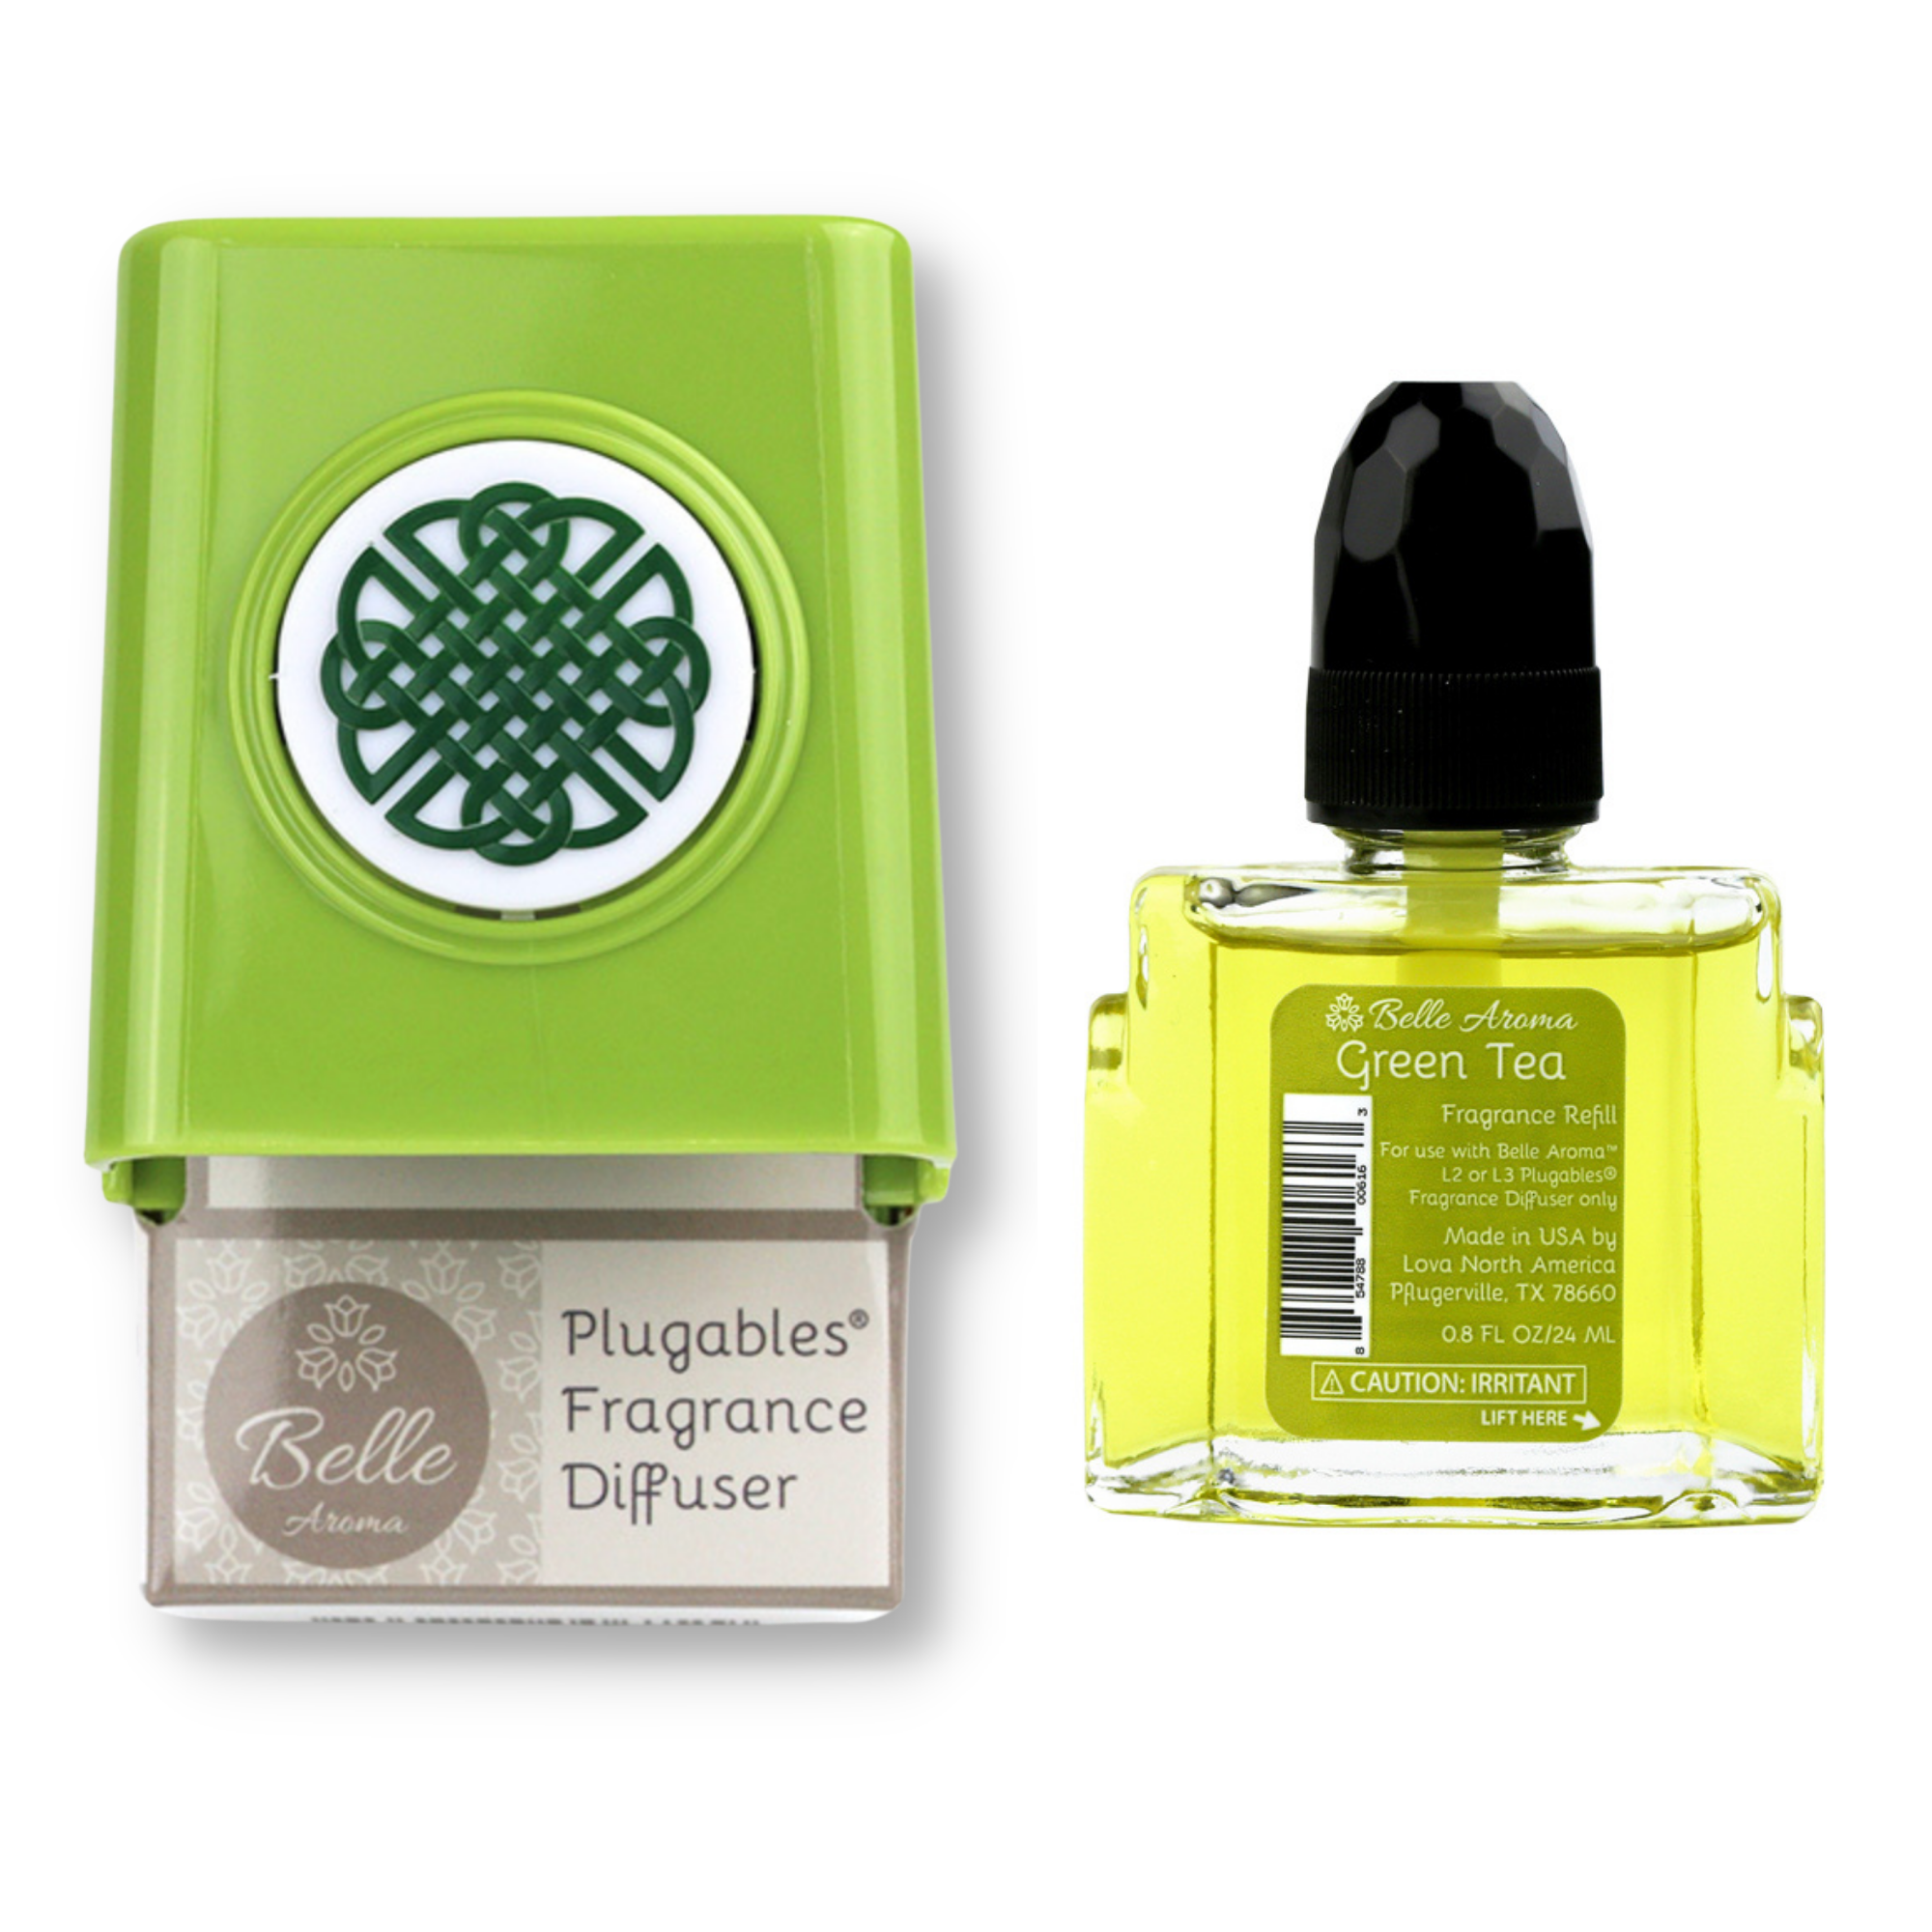 Celtic Knot Medallion Plugables® Plugin Aromalectric® Scented Oil Diffuser - Granny Smith with Green Tea Fragrance Oil Home Fragrance Accessories